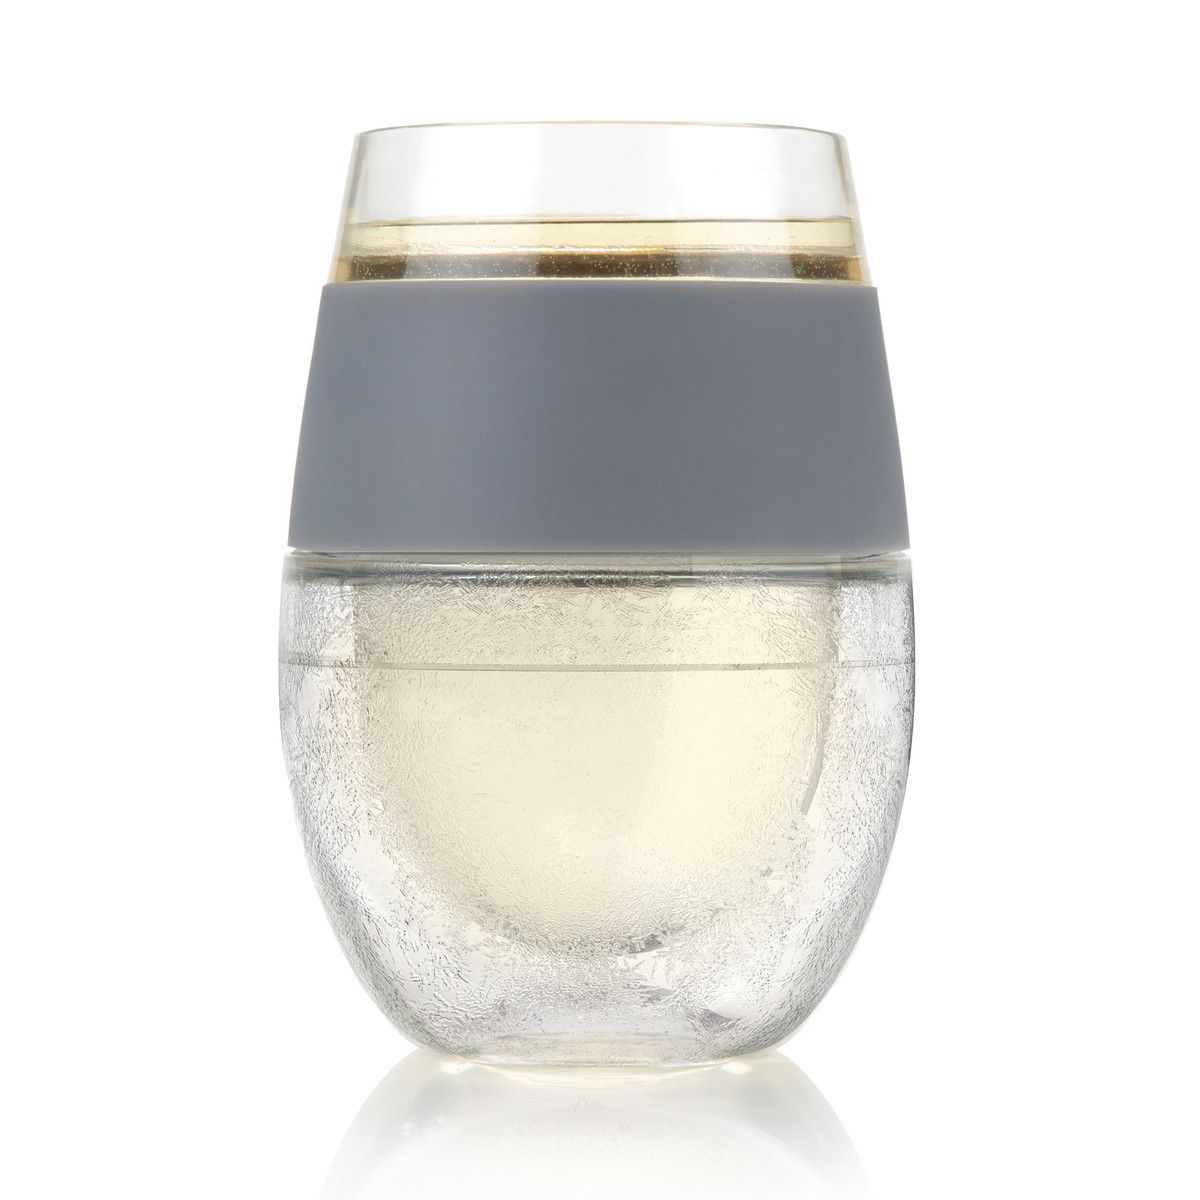 Host Wine Freeze Cooling Cups